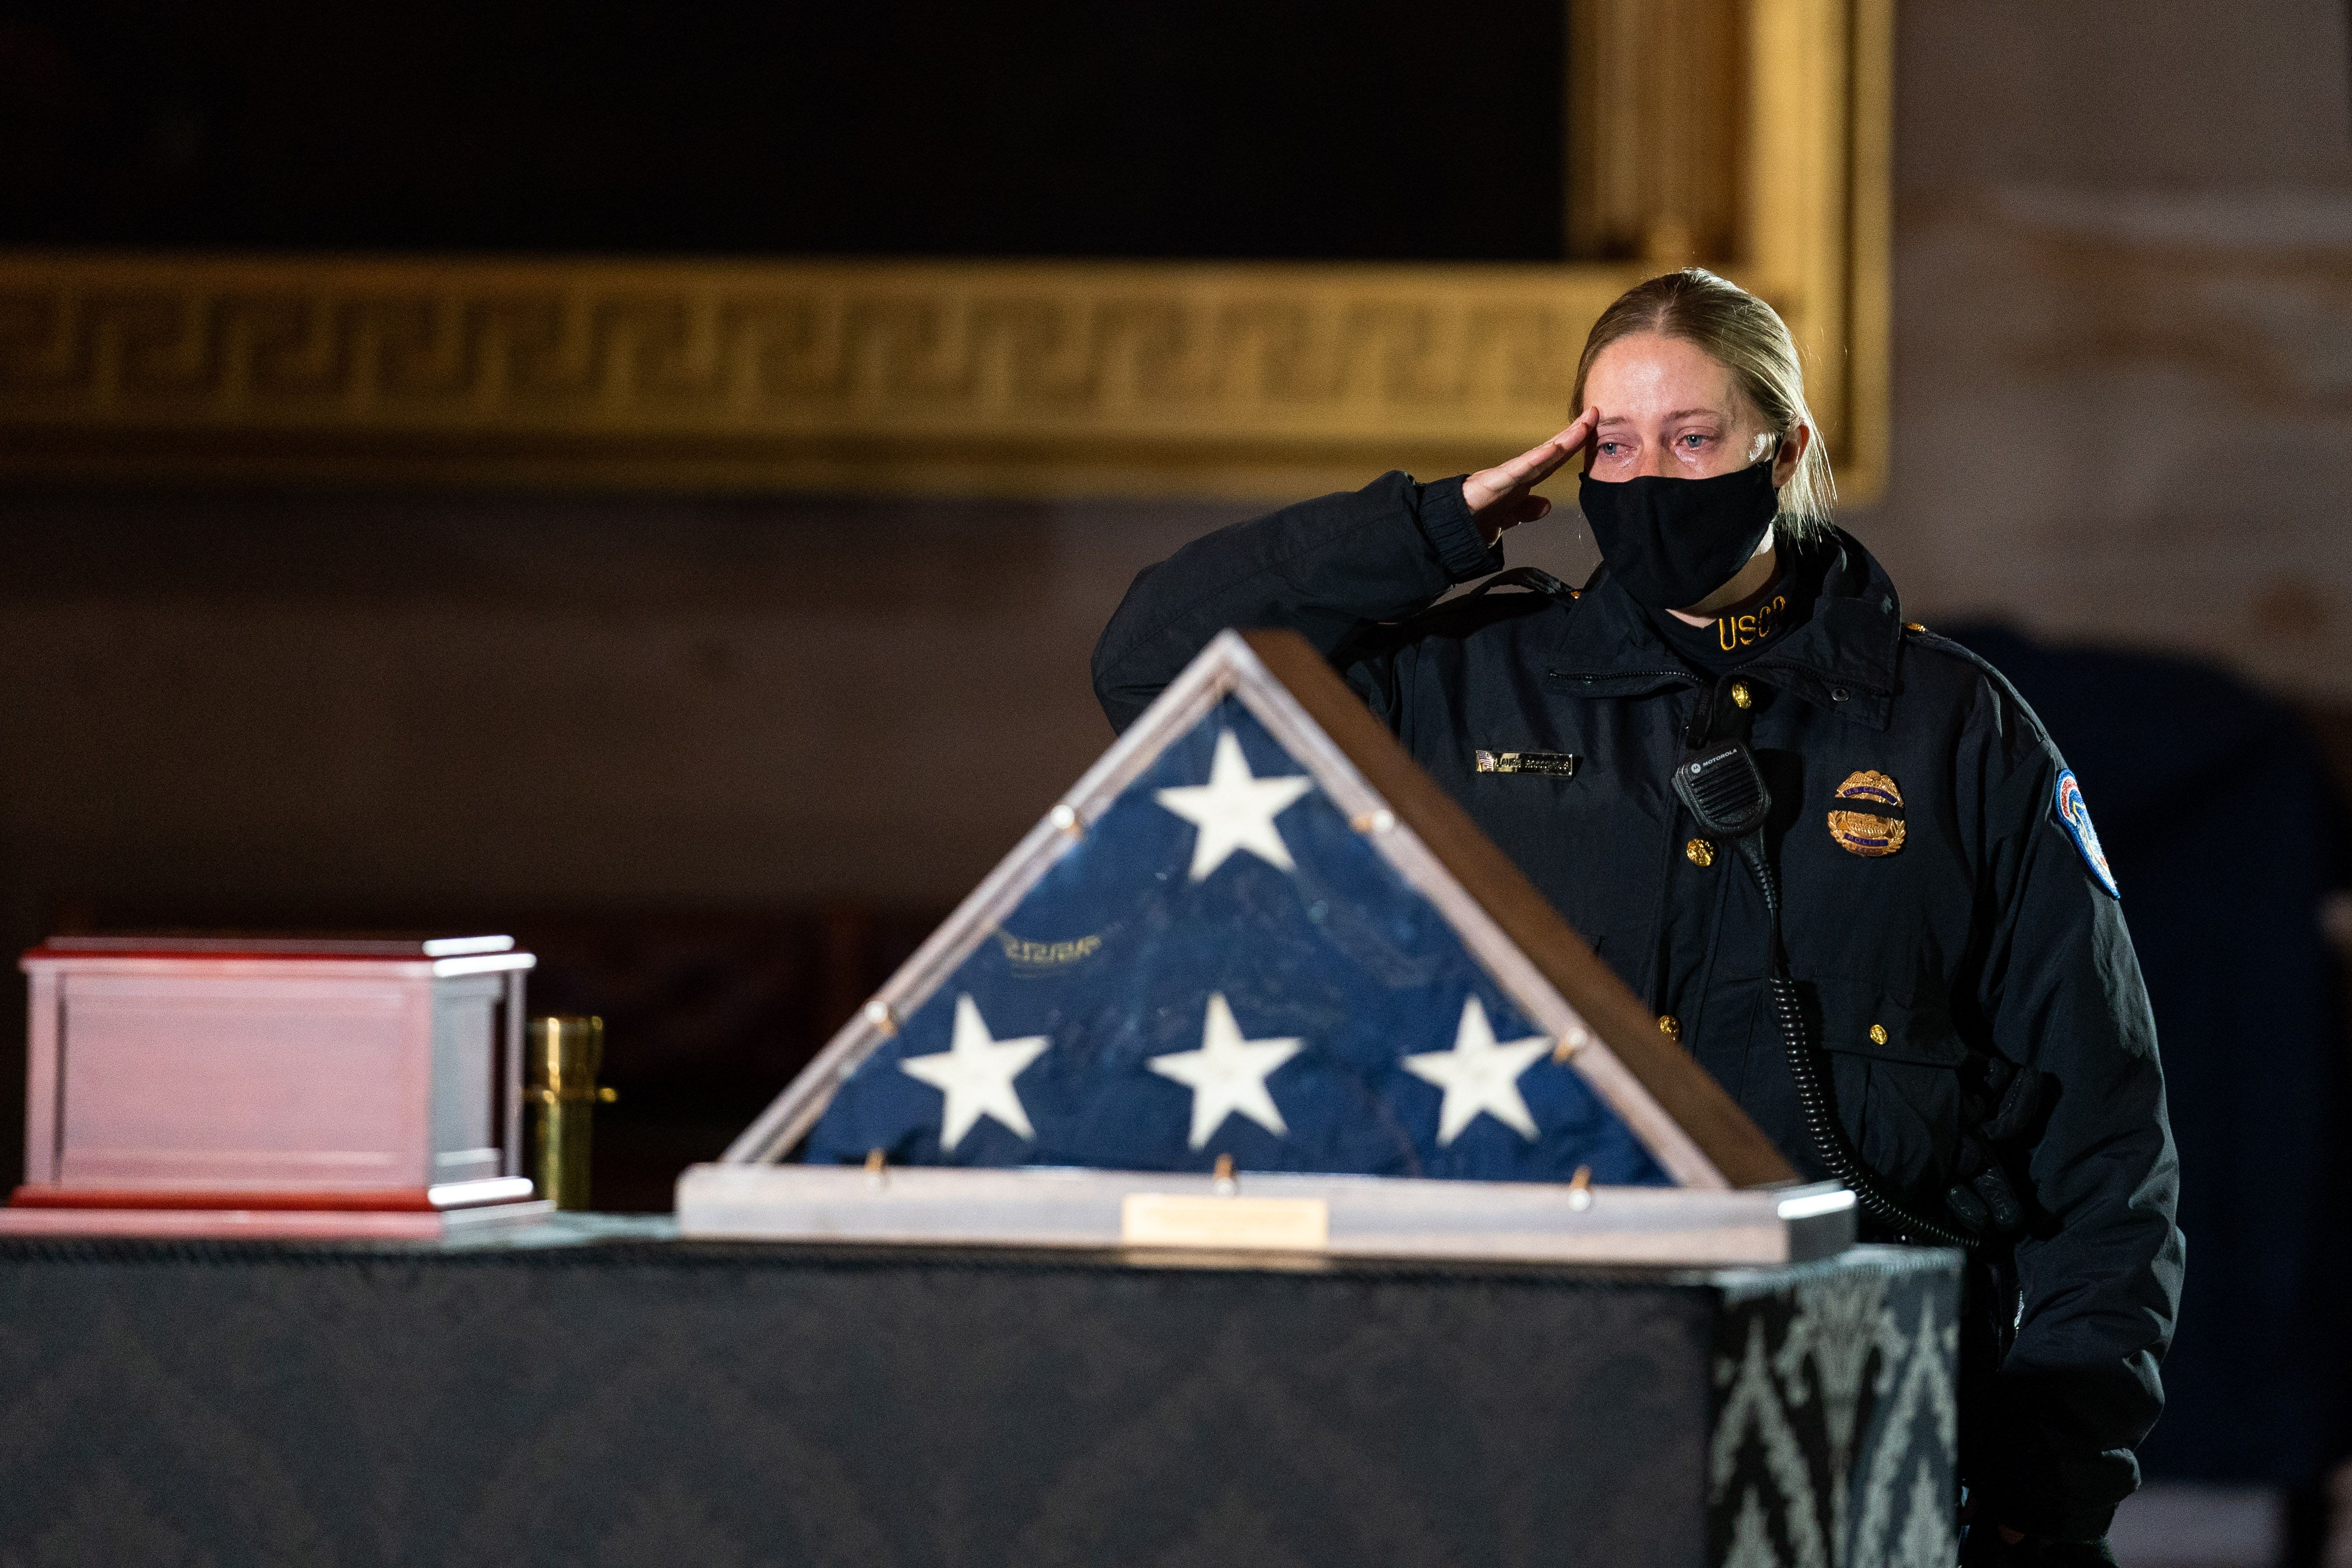 A USCP officer salutes Sicknick. Photo: Anna Moneymaker - Pool/Getty Images